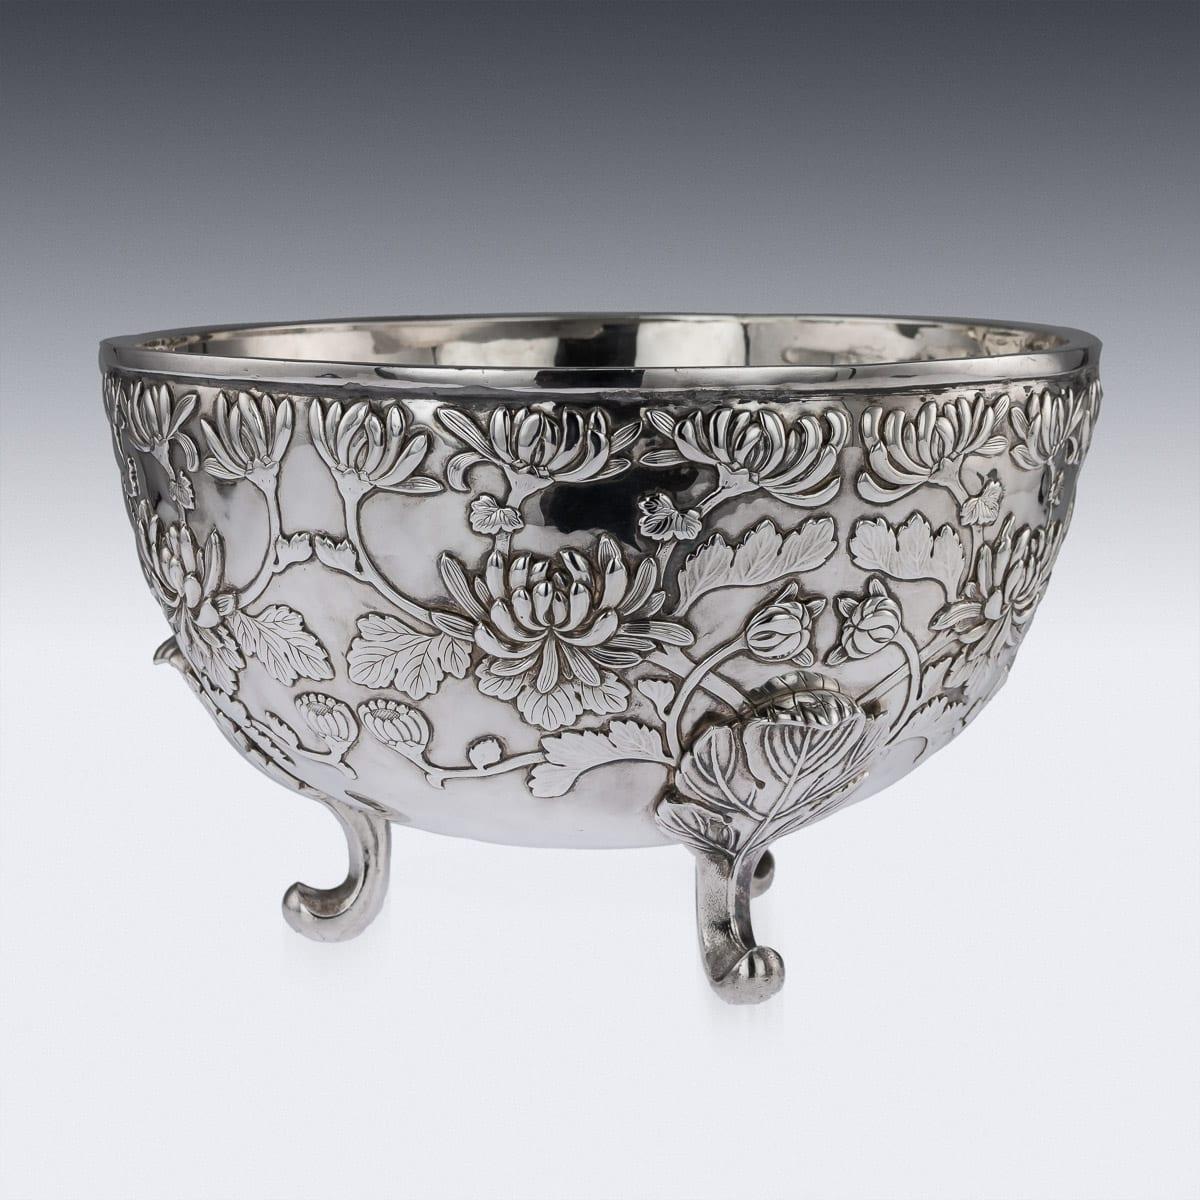 Antique early 20th century Japanese Meiji period monumental solid silver bowl, exceptional and magnificent quality, double walled on three scroll leaf feet, embossed with chrysanthemums. The base is marked with jin-jung mark, meaning pure silver